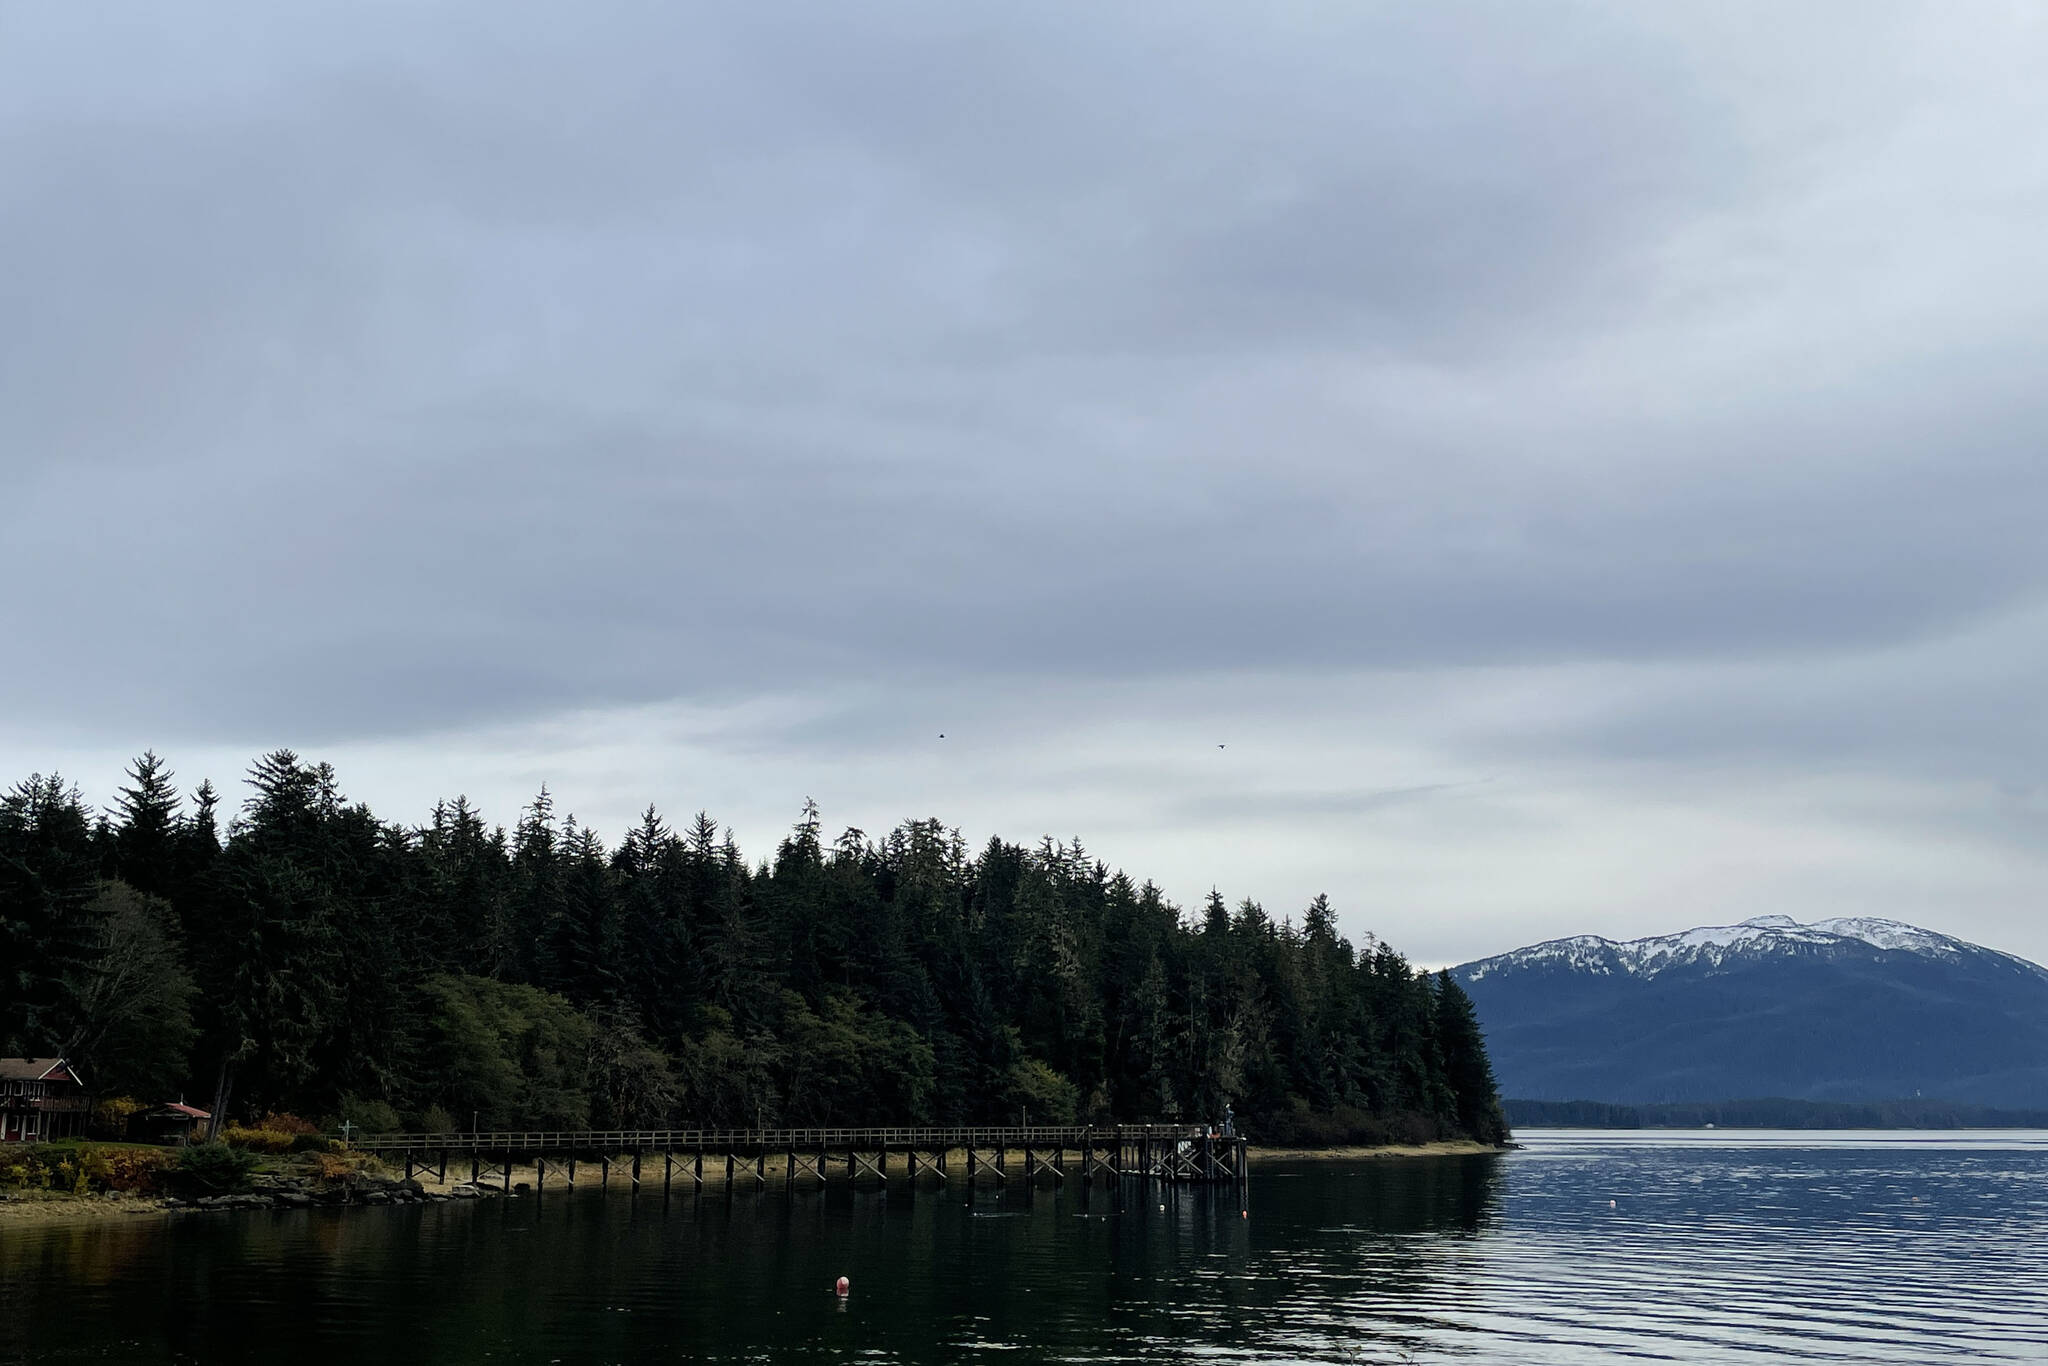 A body was found in the water near the Indian Cove dock on Sunday morning, Oct. 17, 2021 after a call to emergency services that she hadn’t returned from a walk. (Michael S. Lockett / Juneau Empire)